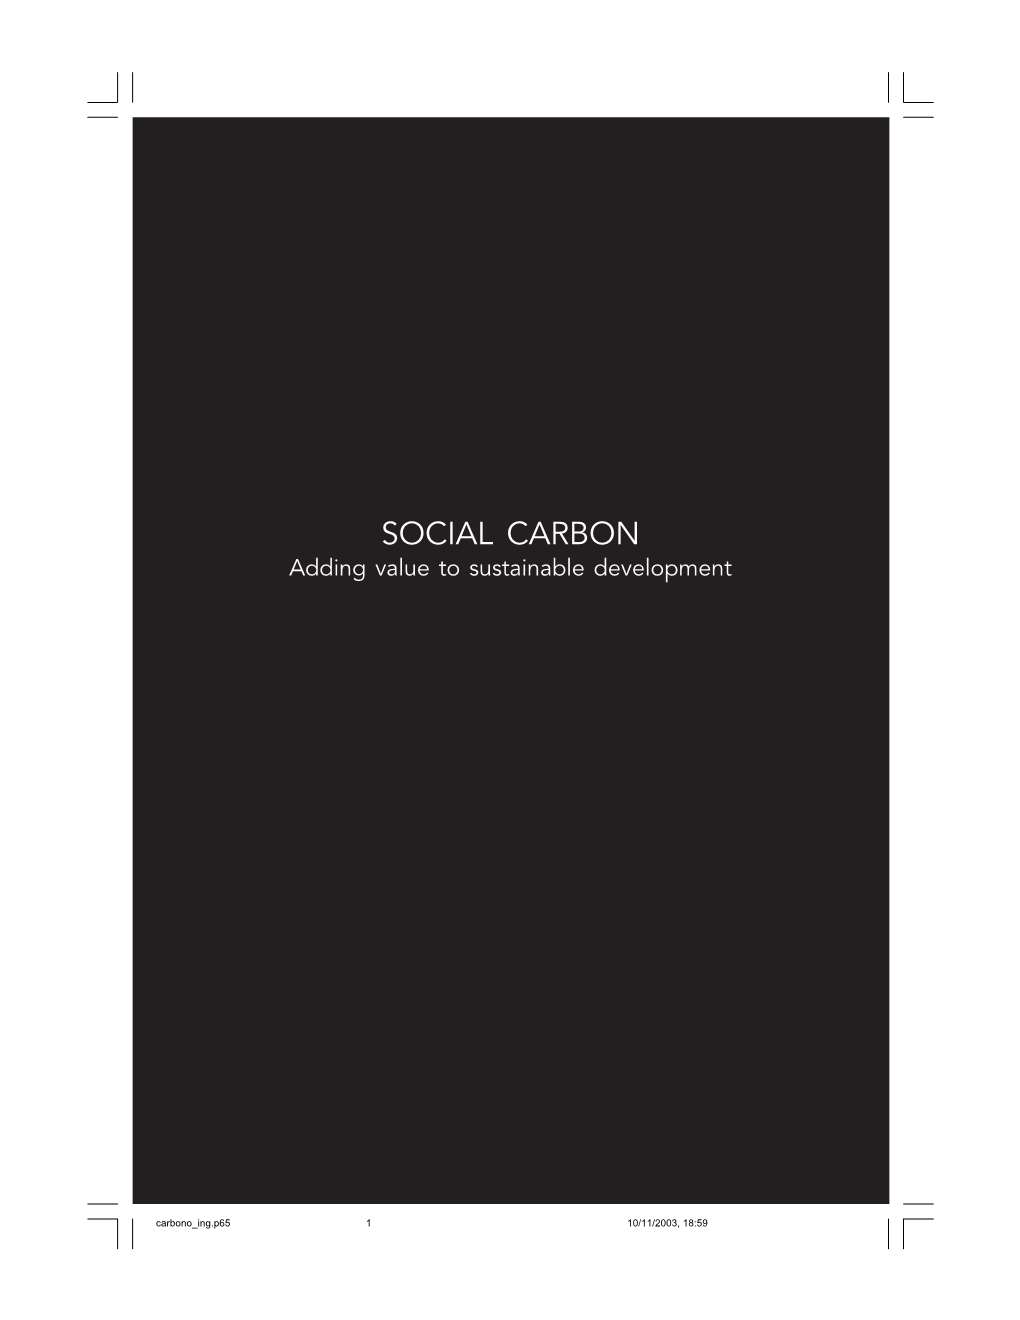 SOCIAL CARBON Adding Value to Sustainable Development